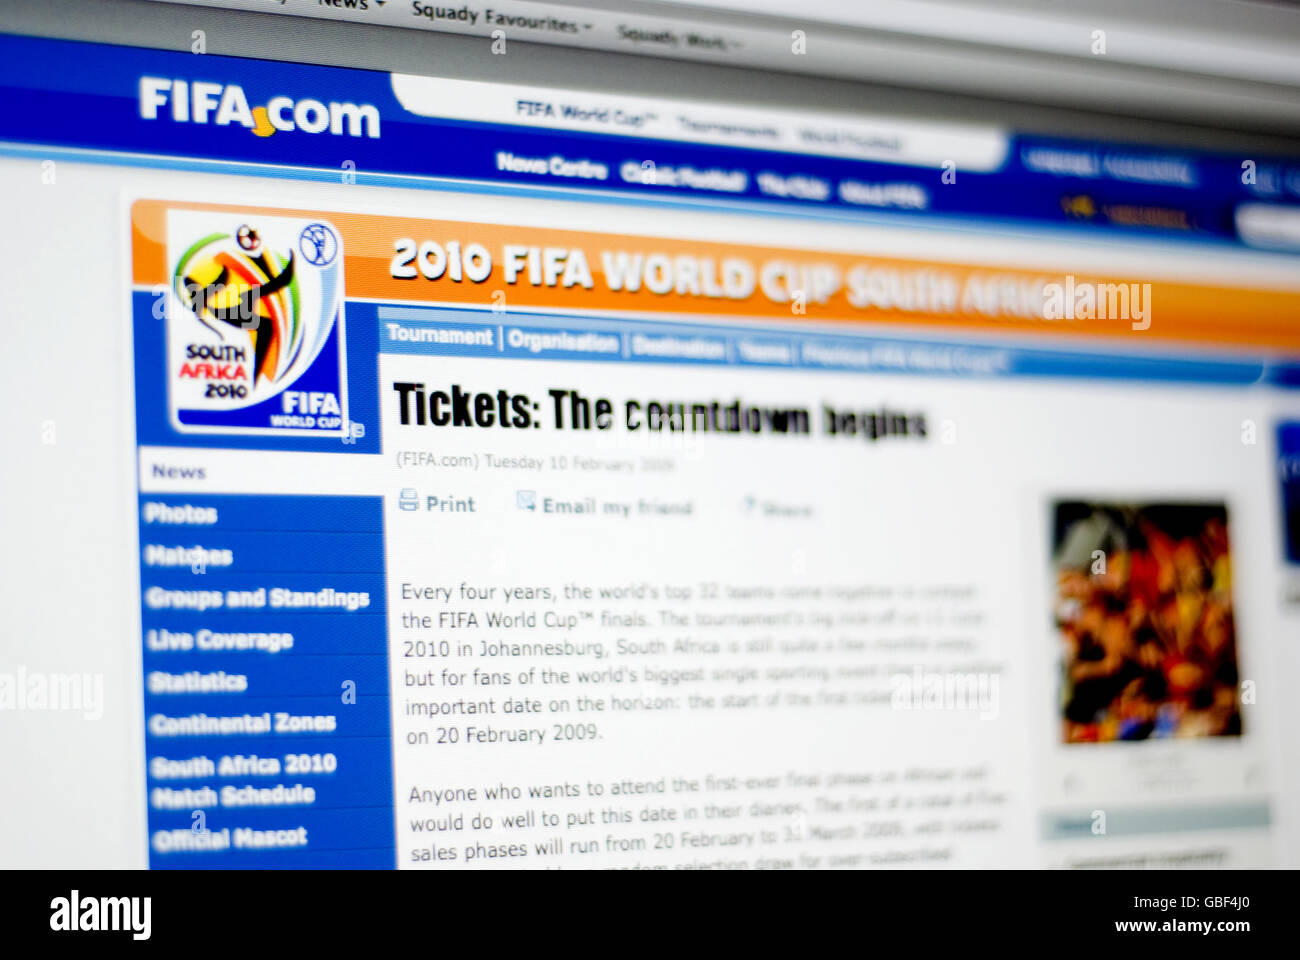 Soccer - FIFA World Cup 2010 - Online Ticket Launch